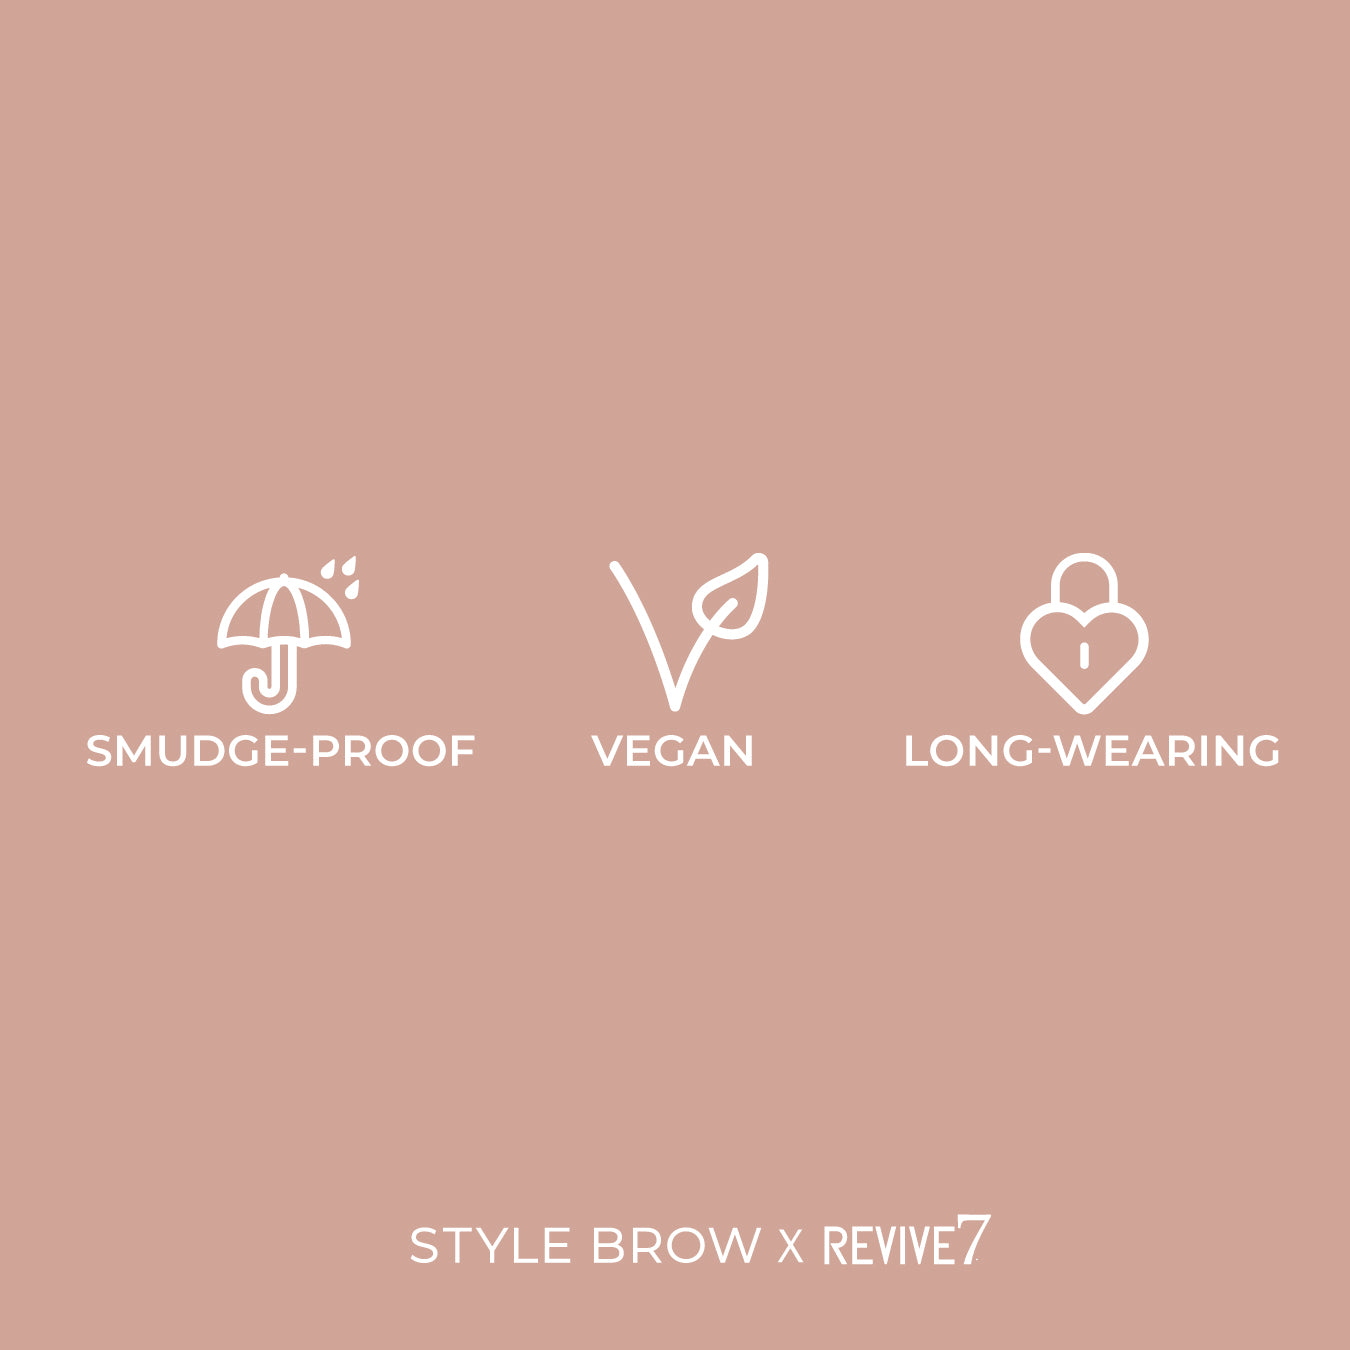 Style Brow X Revive7 & Misting Spray Combo Set